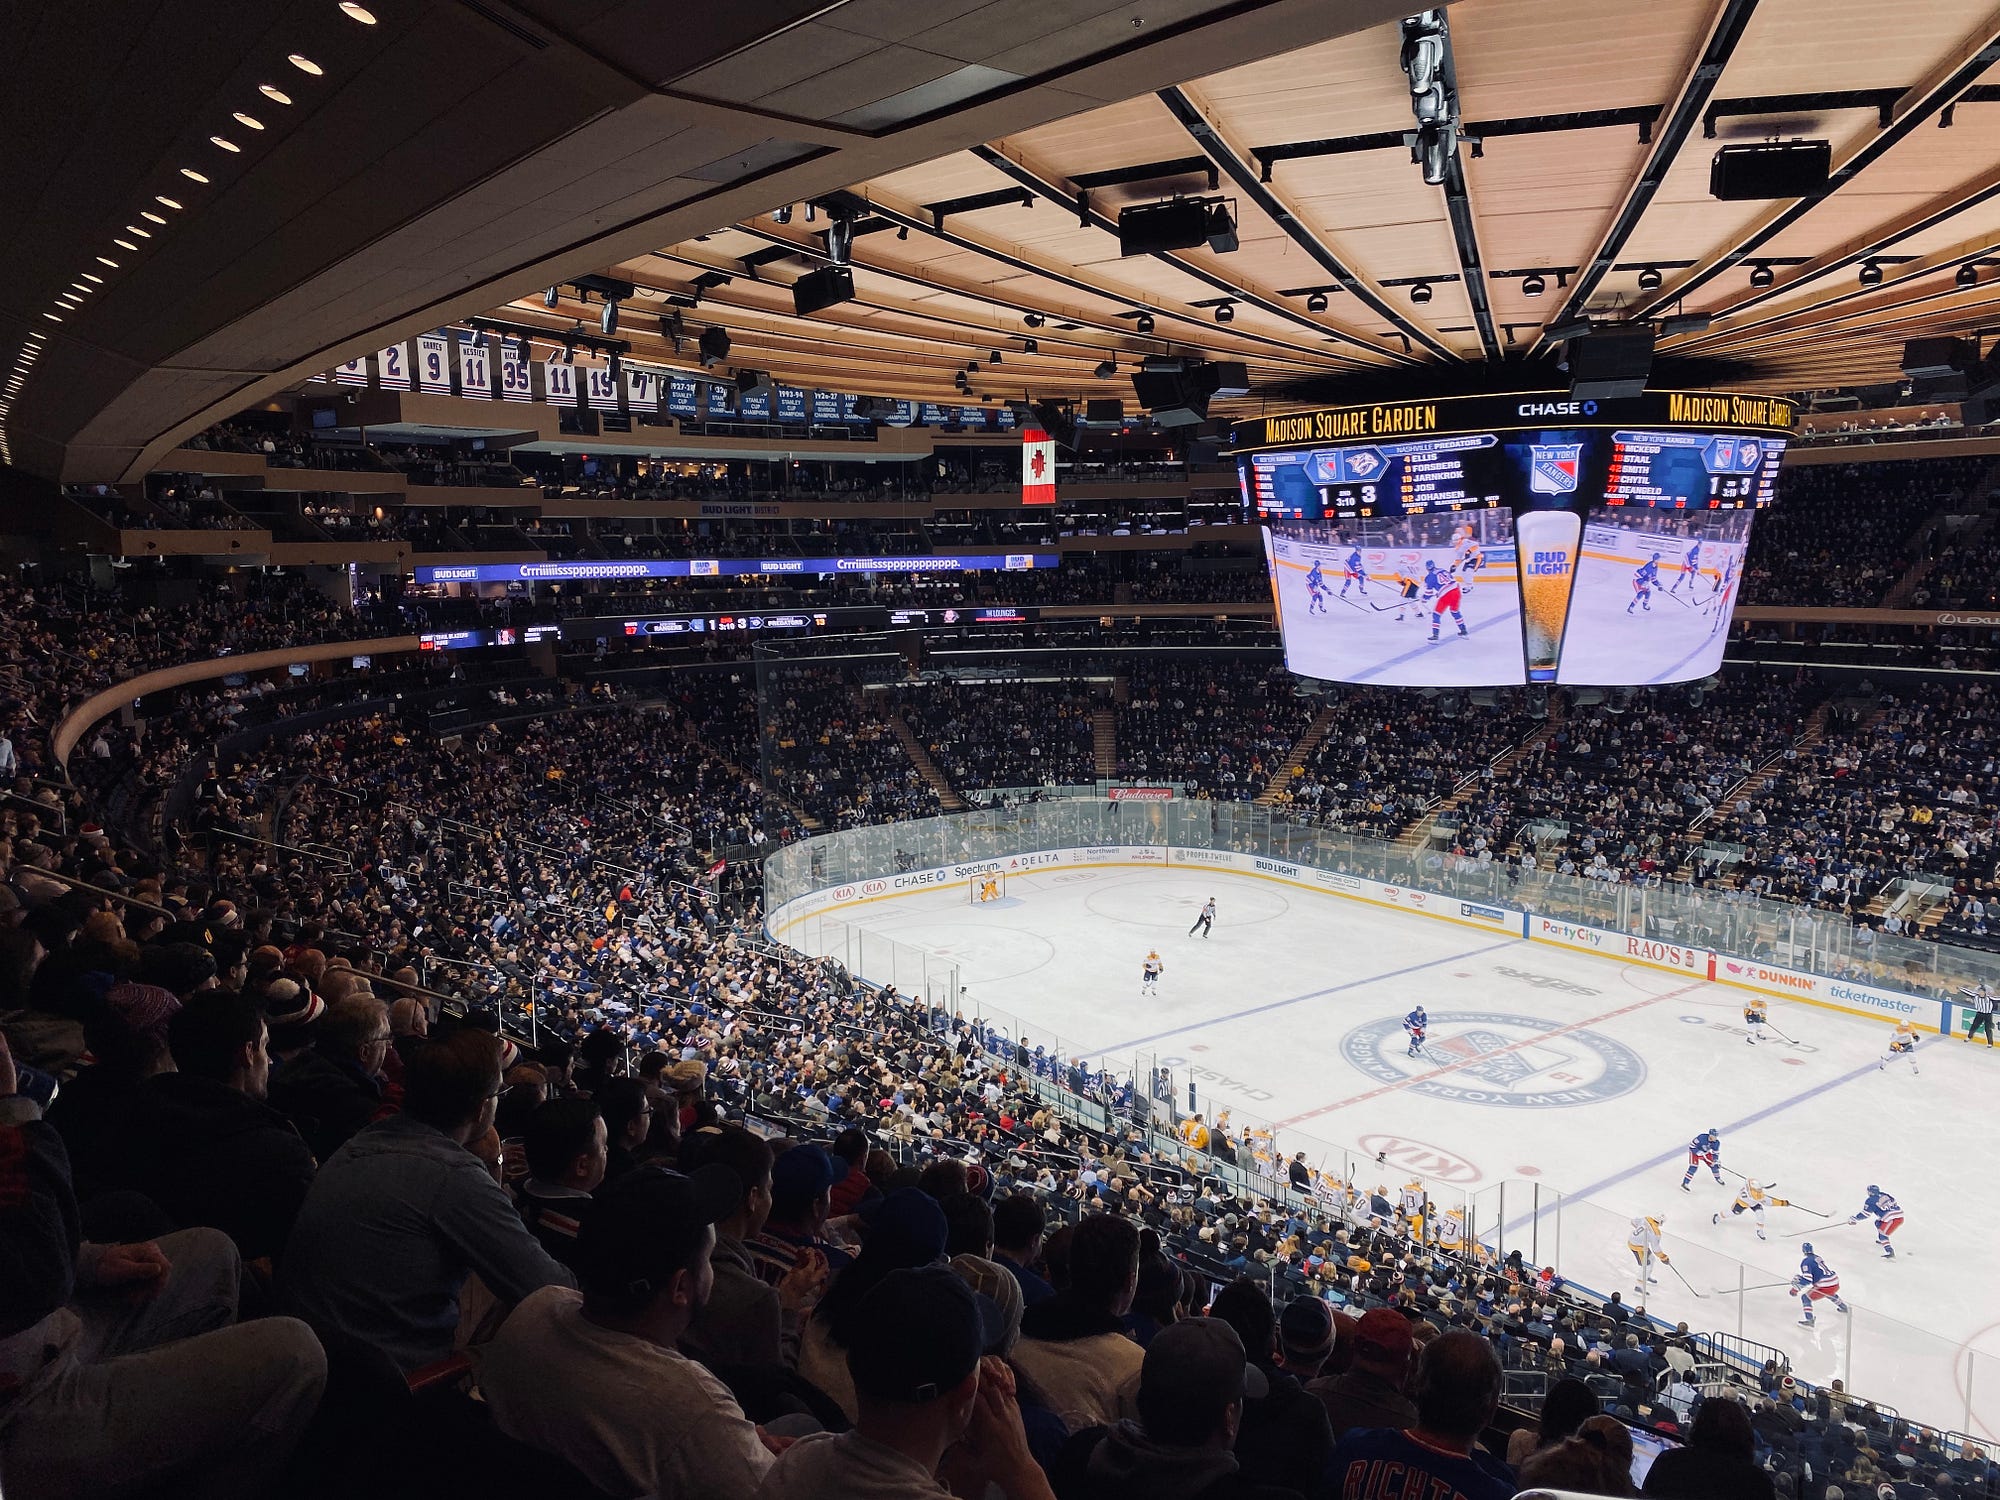 Ball Arena Ranked As Best NHL Arena For Fans, Per Study